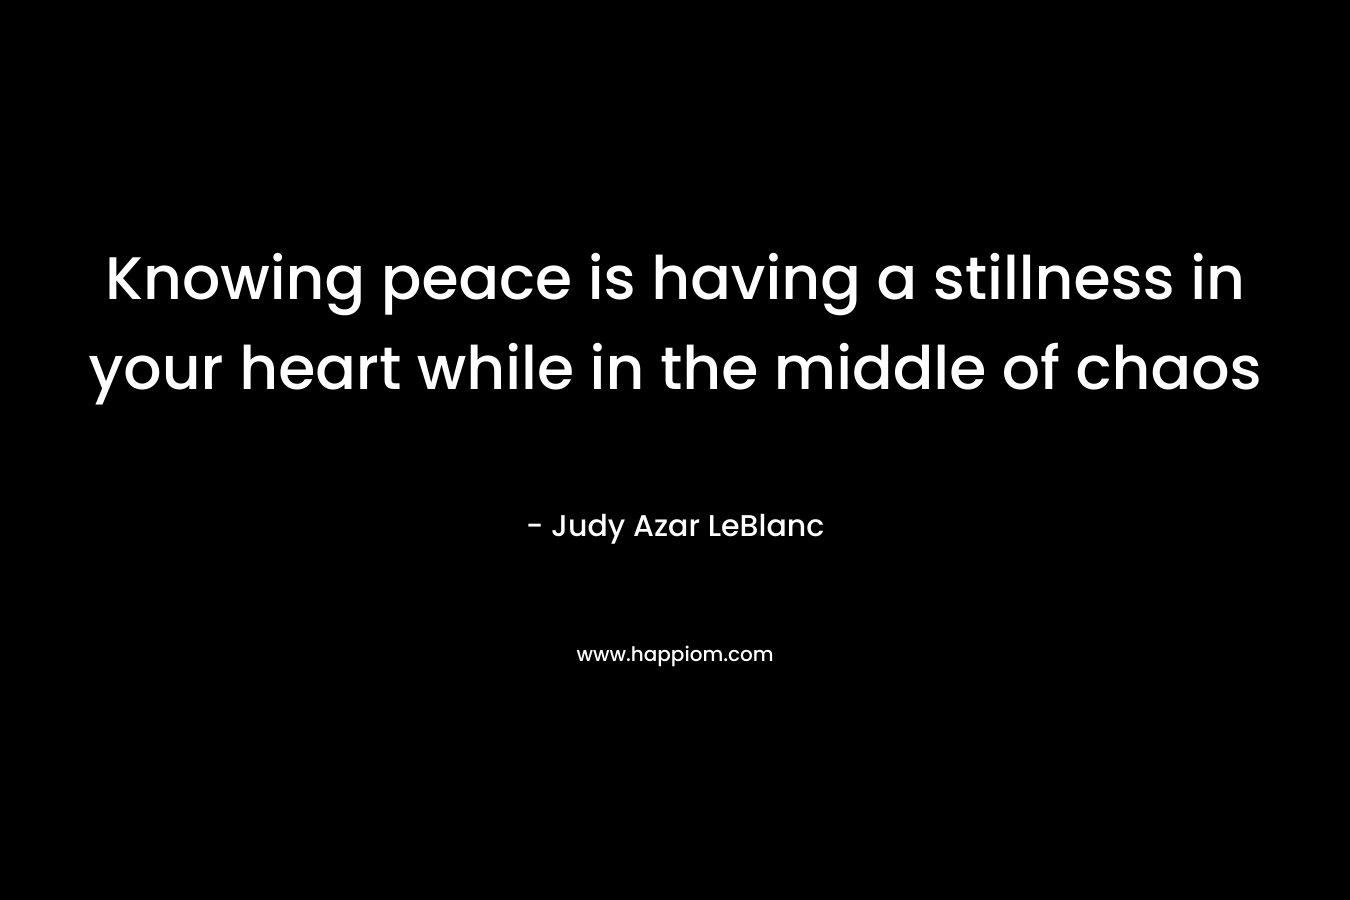 Knowing peace is having a stillness in your heart while in the middle of chaos – Judy Azar LeBlanc